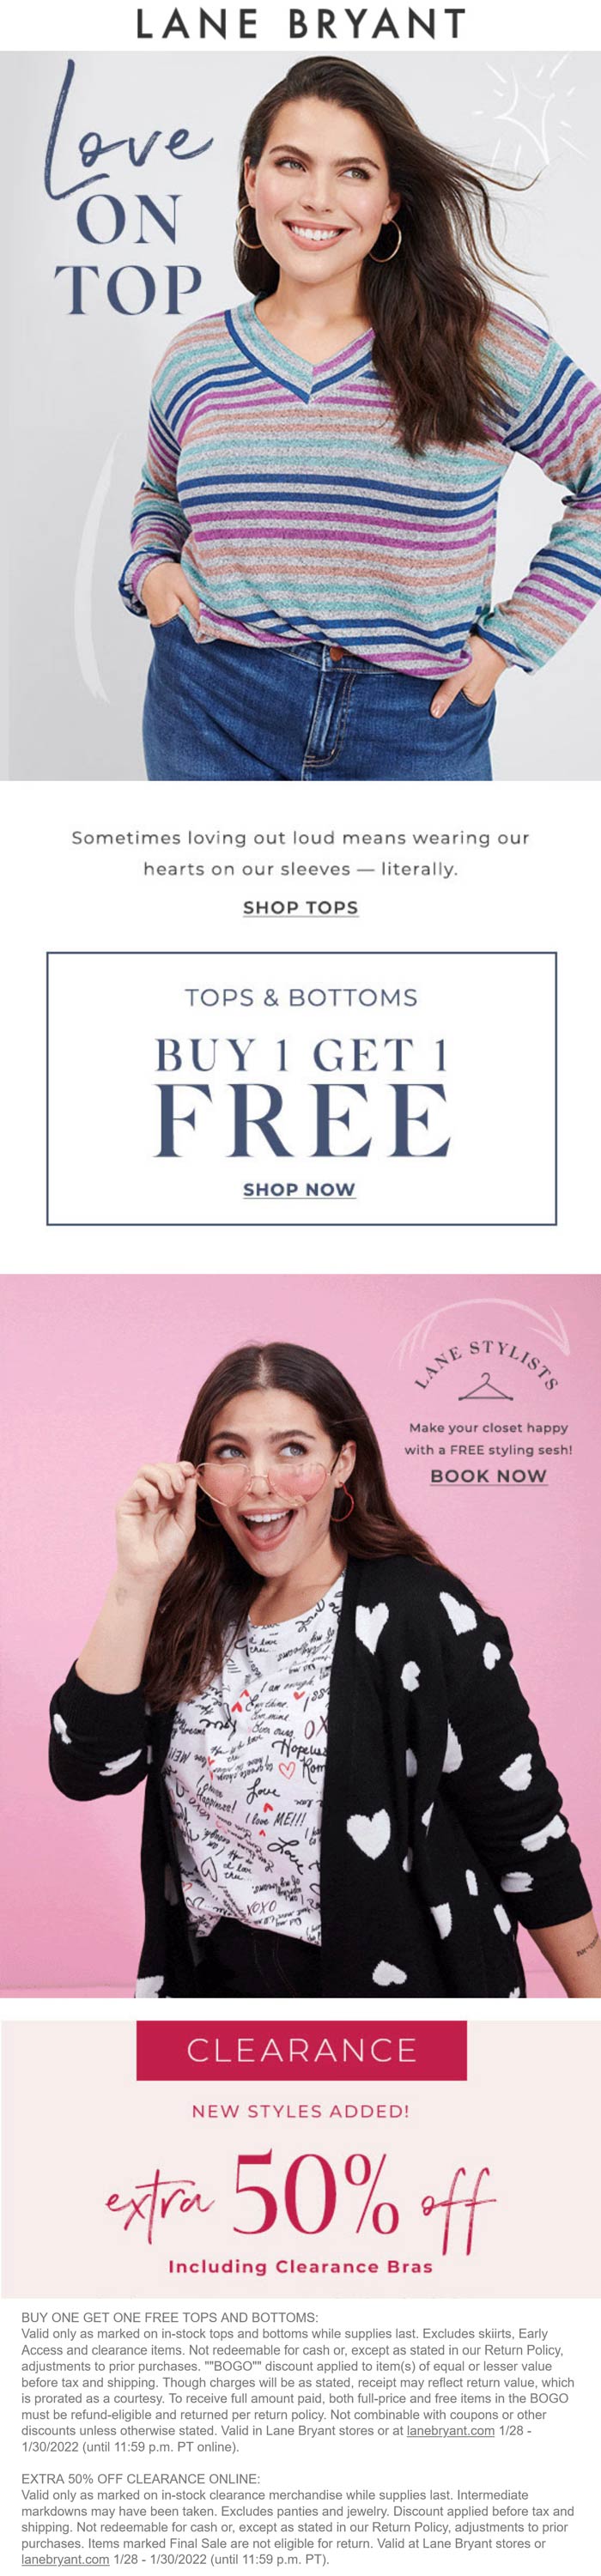 Lane Bryant stores Coupon  Second top or bottom free & more at Lane Bryant, ditto online #lanebryant 